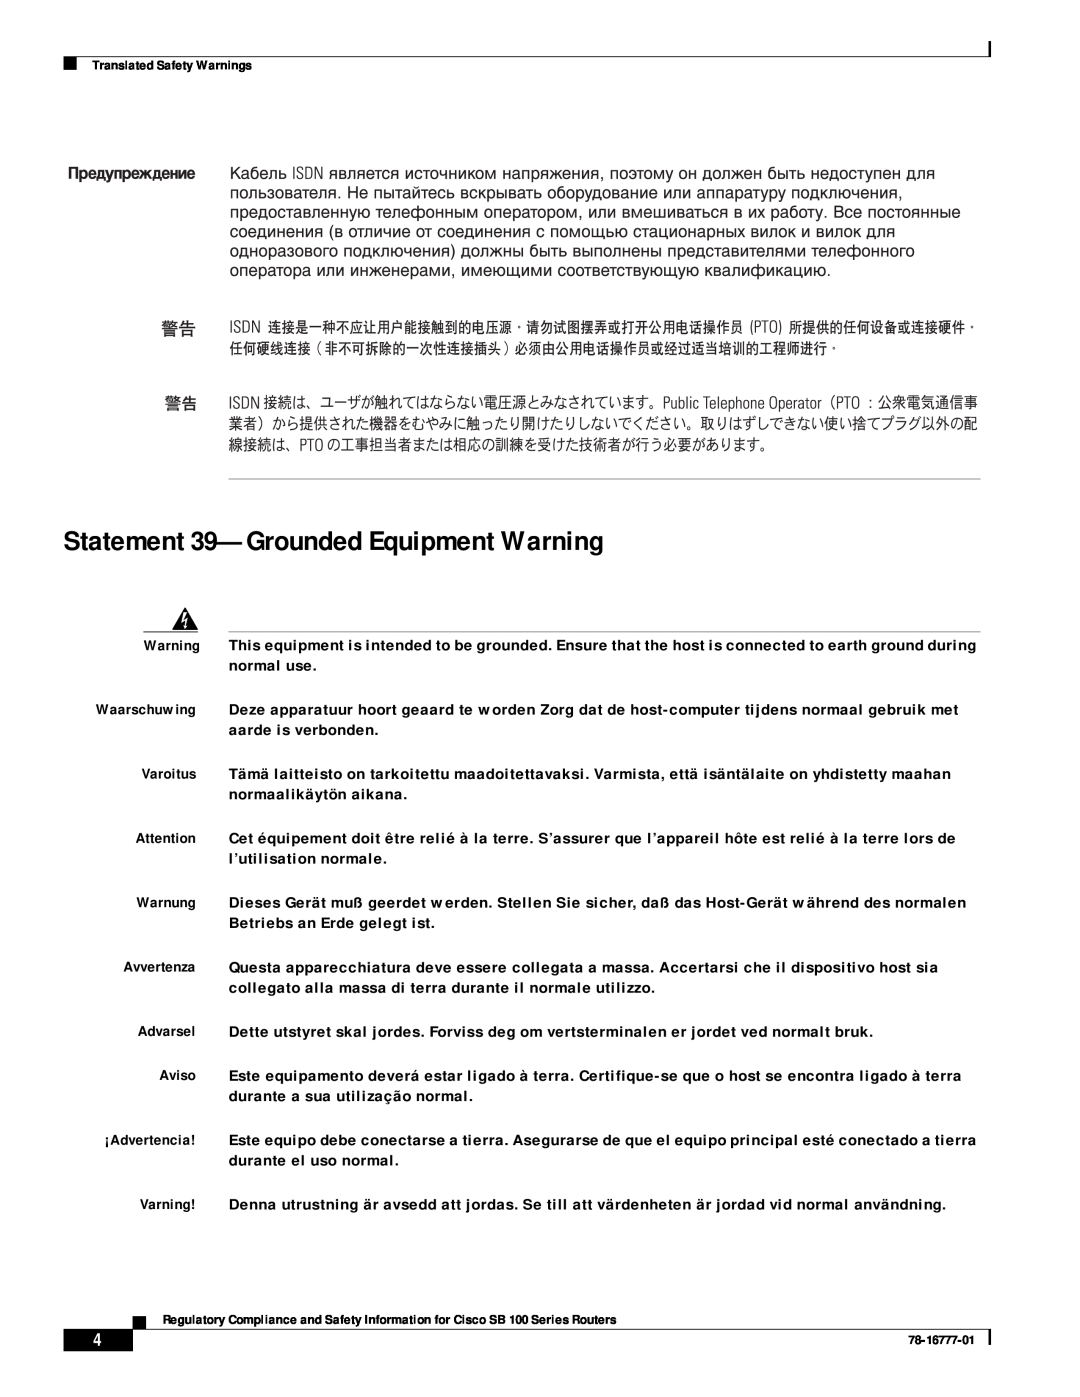 Cisco Systems SB 100 Series manual Statement 39-Grounded Equipment Warning 